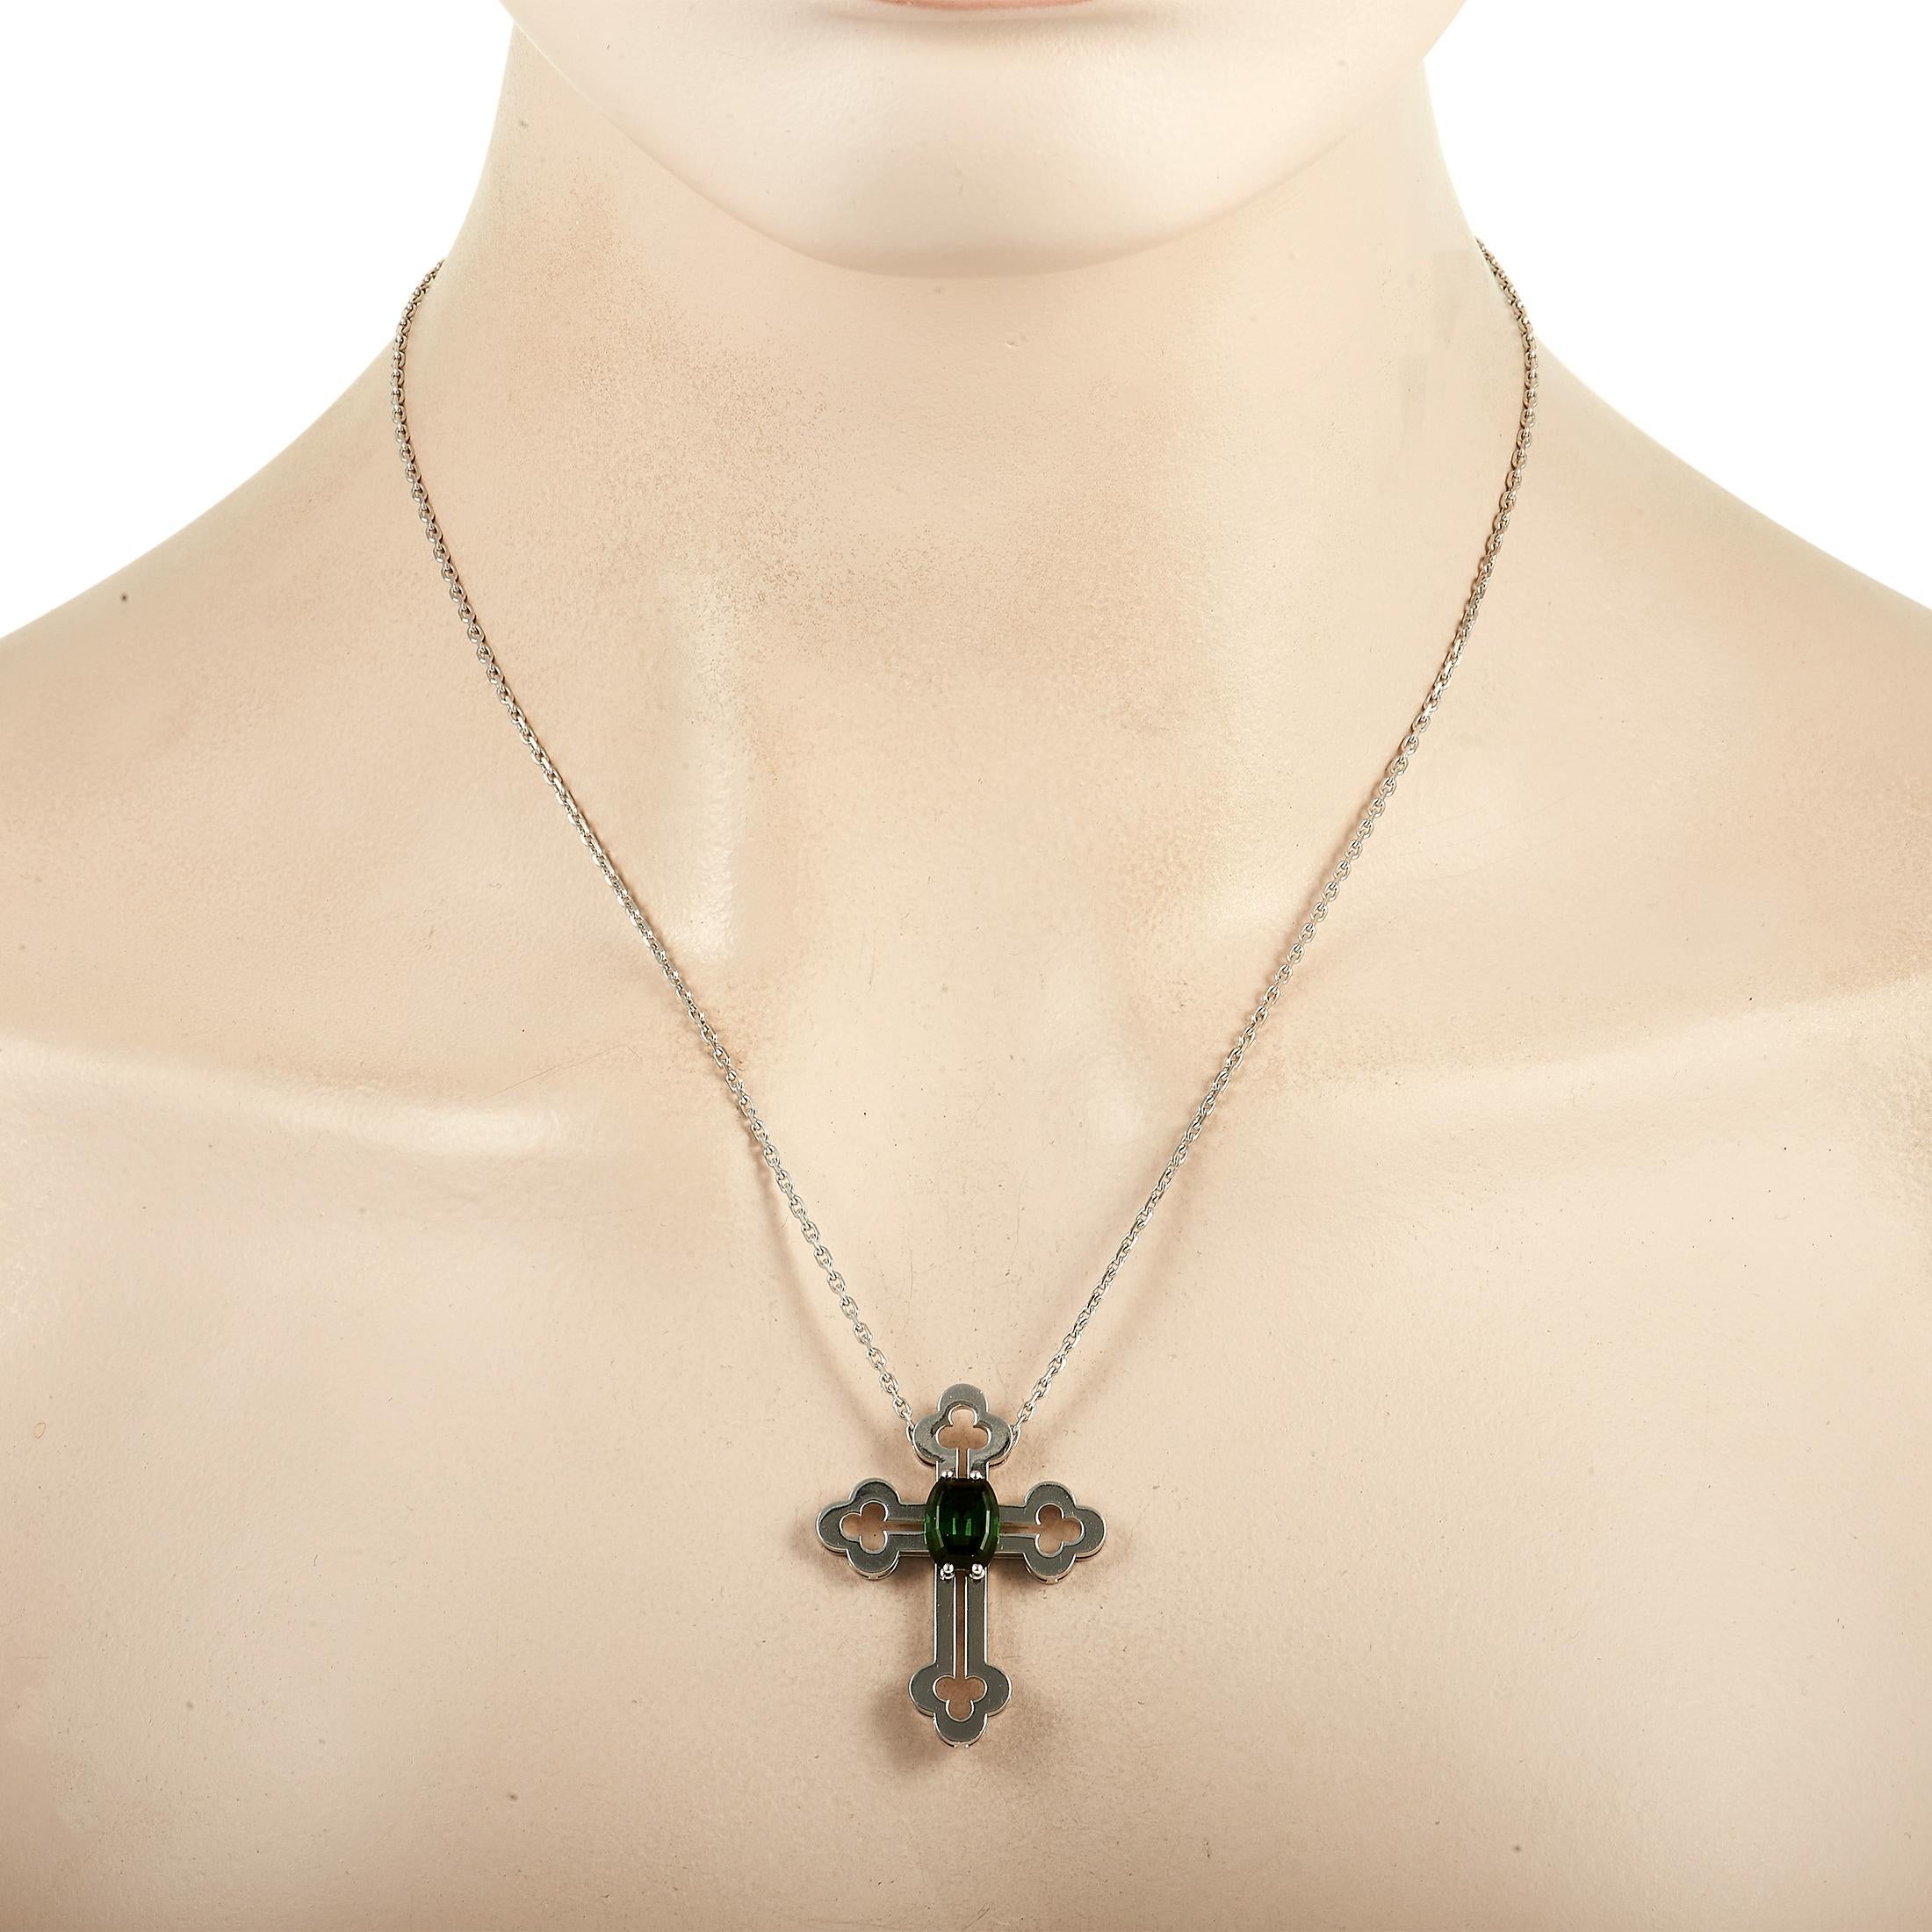 This pendant necklace from Franck Muller offers a contemporary take on a classic piece of jewelry. The 18K White Gold cross pendant measures 1.5” long, 1.25” wide, and possesses a sleek, modern aesthetic. At the center, a striking green Tourmaline